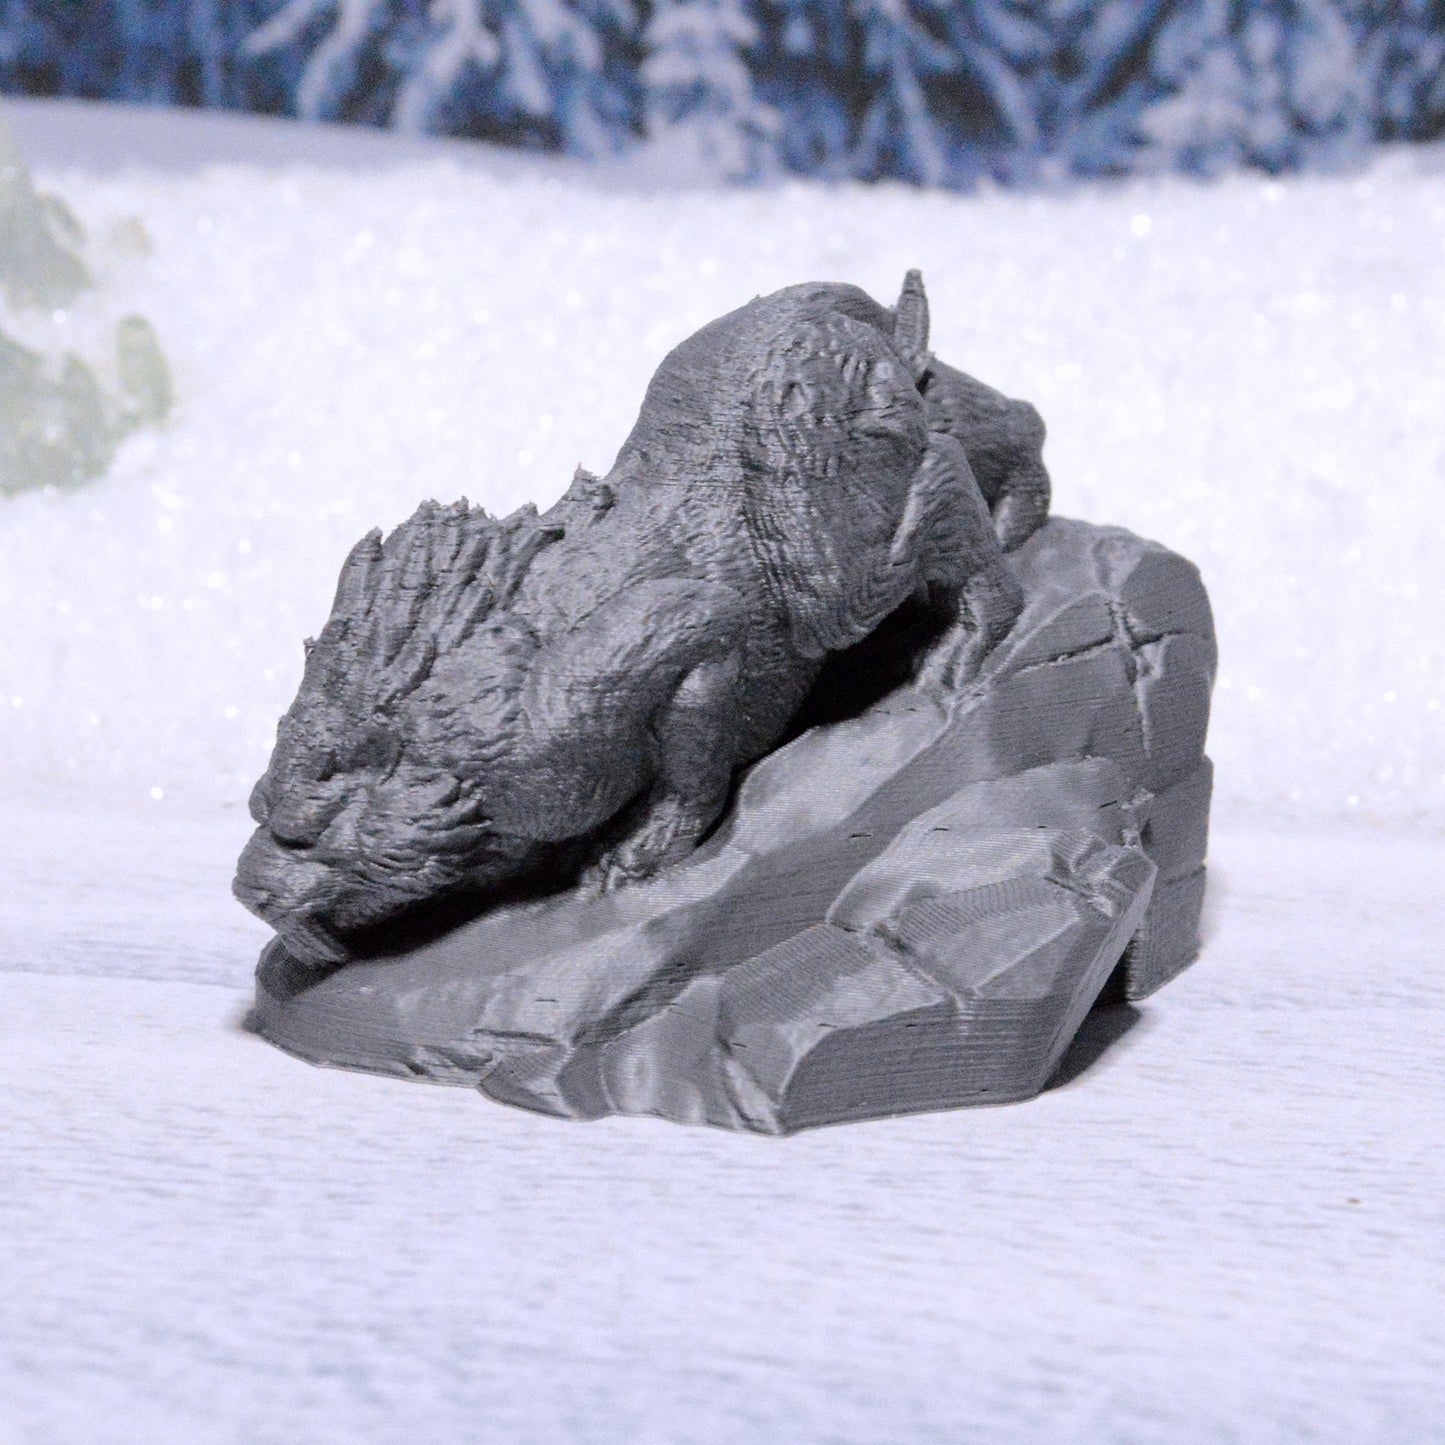 Miniature Sabertooth for D&D Icewind Dale Terrain 15mm 28mm 32mm 42mm, Sneaking Crag Cat for DnD Pathfinder Arctic Frozen Snowy Icy Animal